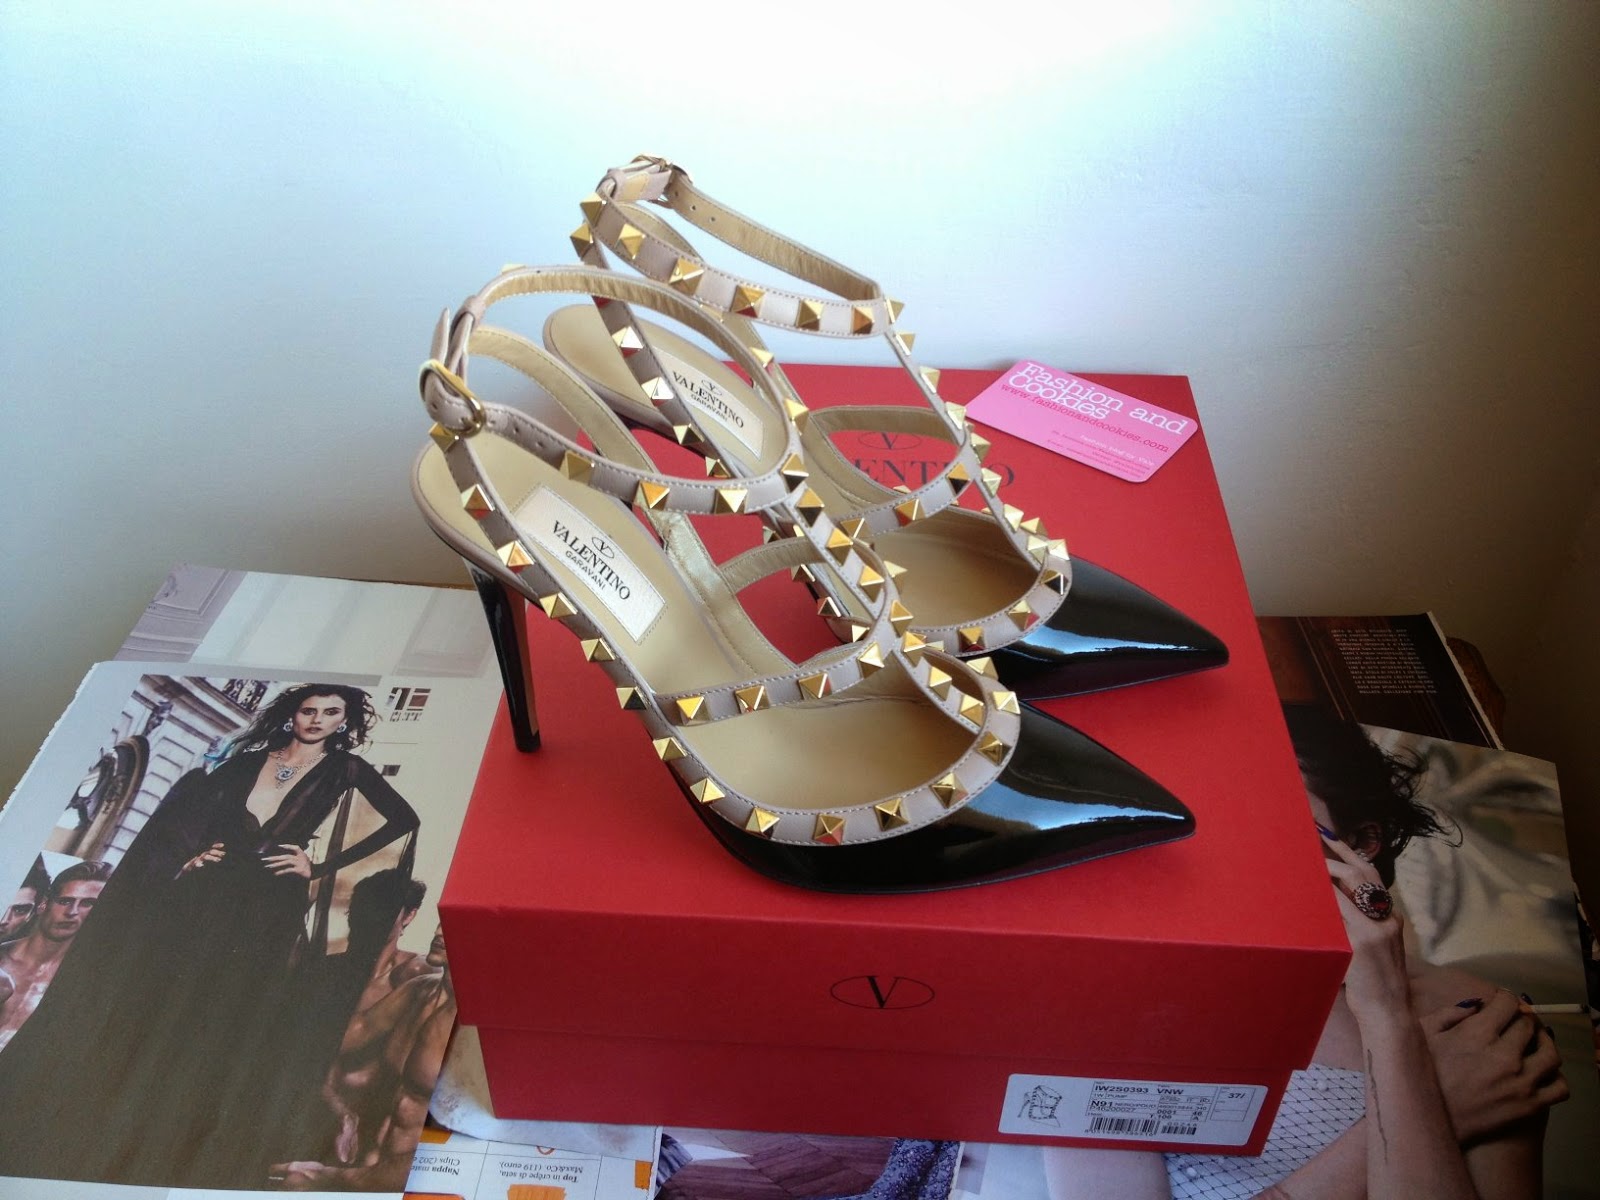 Valentino Rockstud pumps review, Valentino rockstud fit and size, Valentino Rockstud review, Valentino Rockstud patent leather, Fashion and Cookies fashion blog, fashion blogger